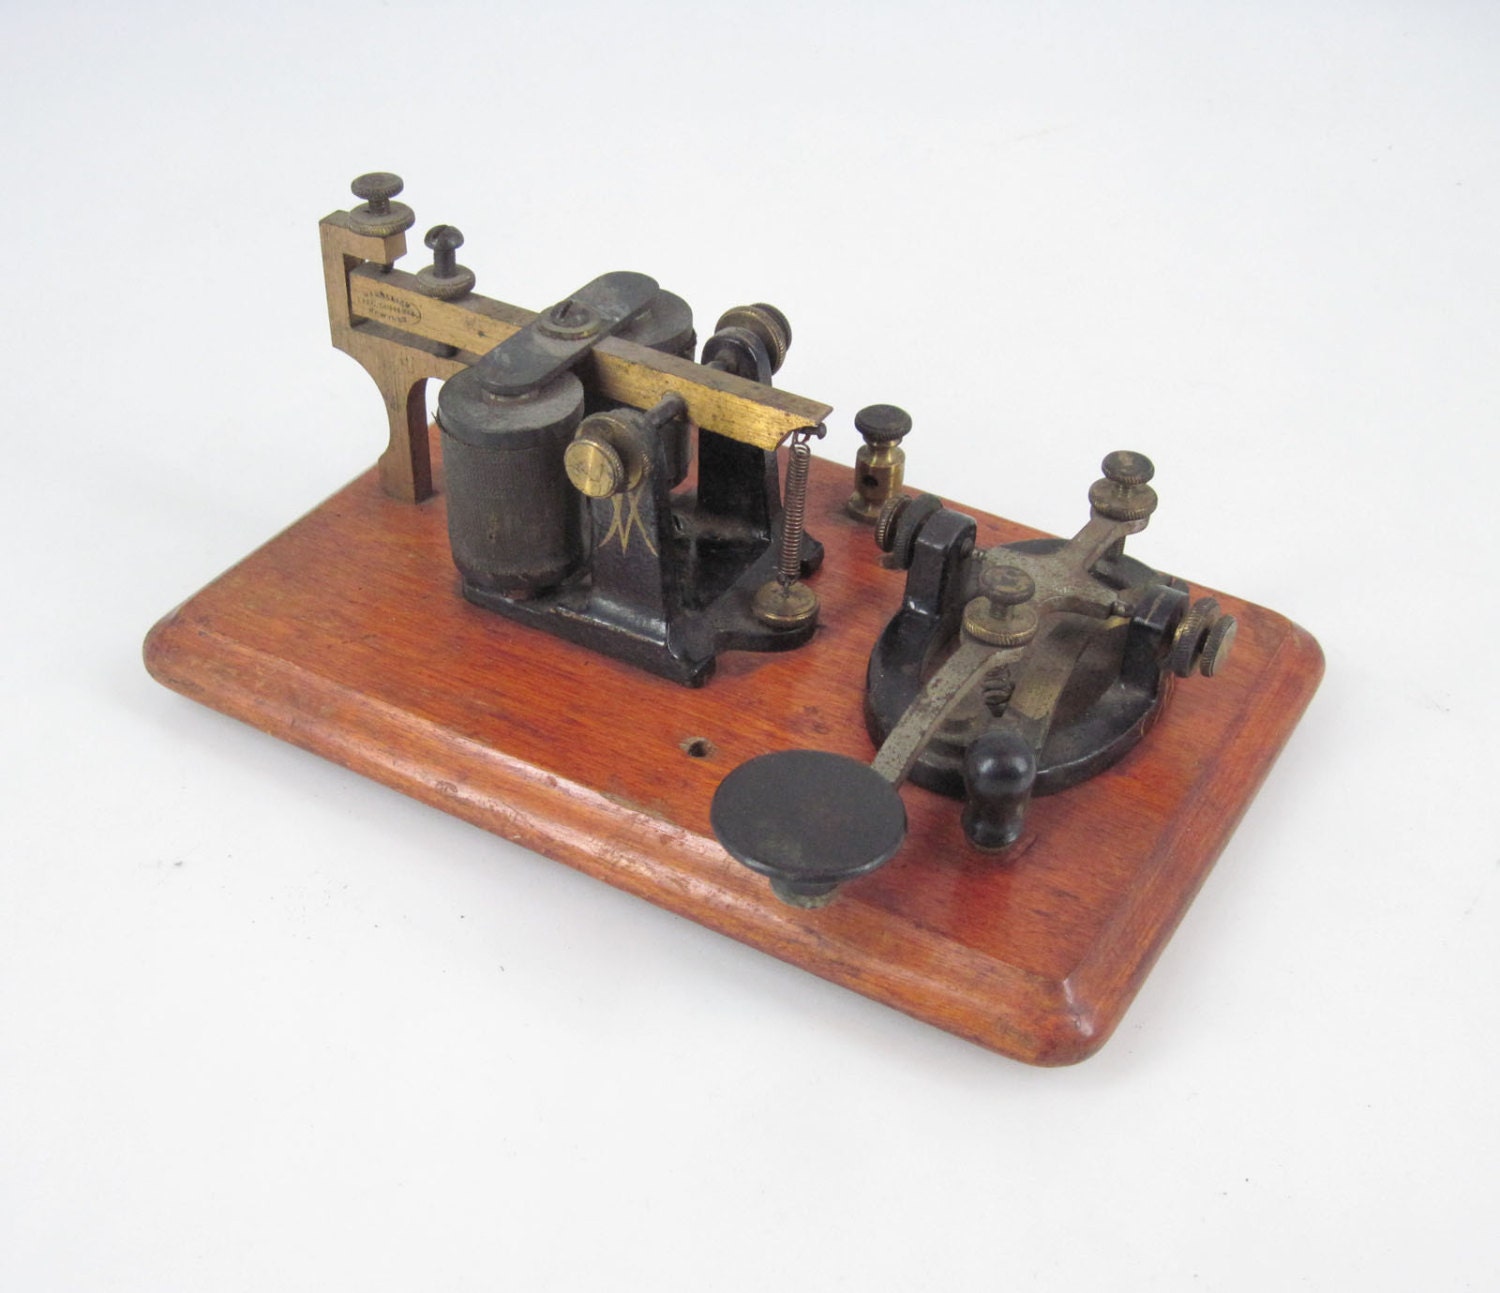 Antique Telegraph Key And Sounder Telegraphy Station On